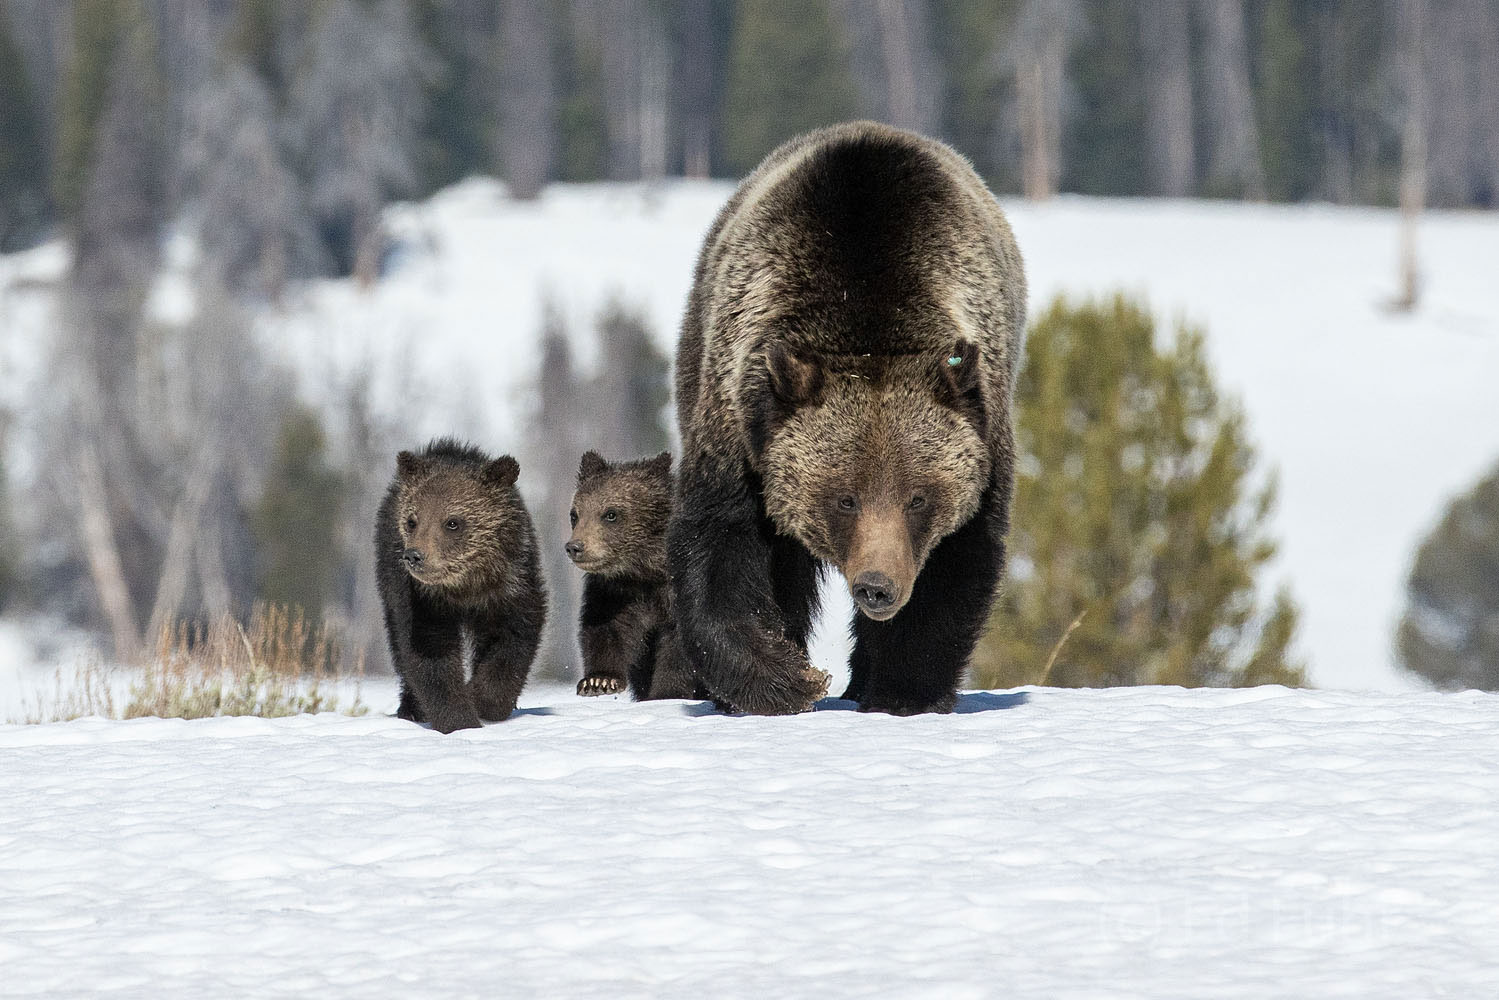 A large grizzly slowly makes her way across the still-deep snow of late May, along with her two cubs.   Mom may be stronger but...